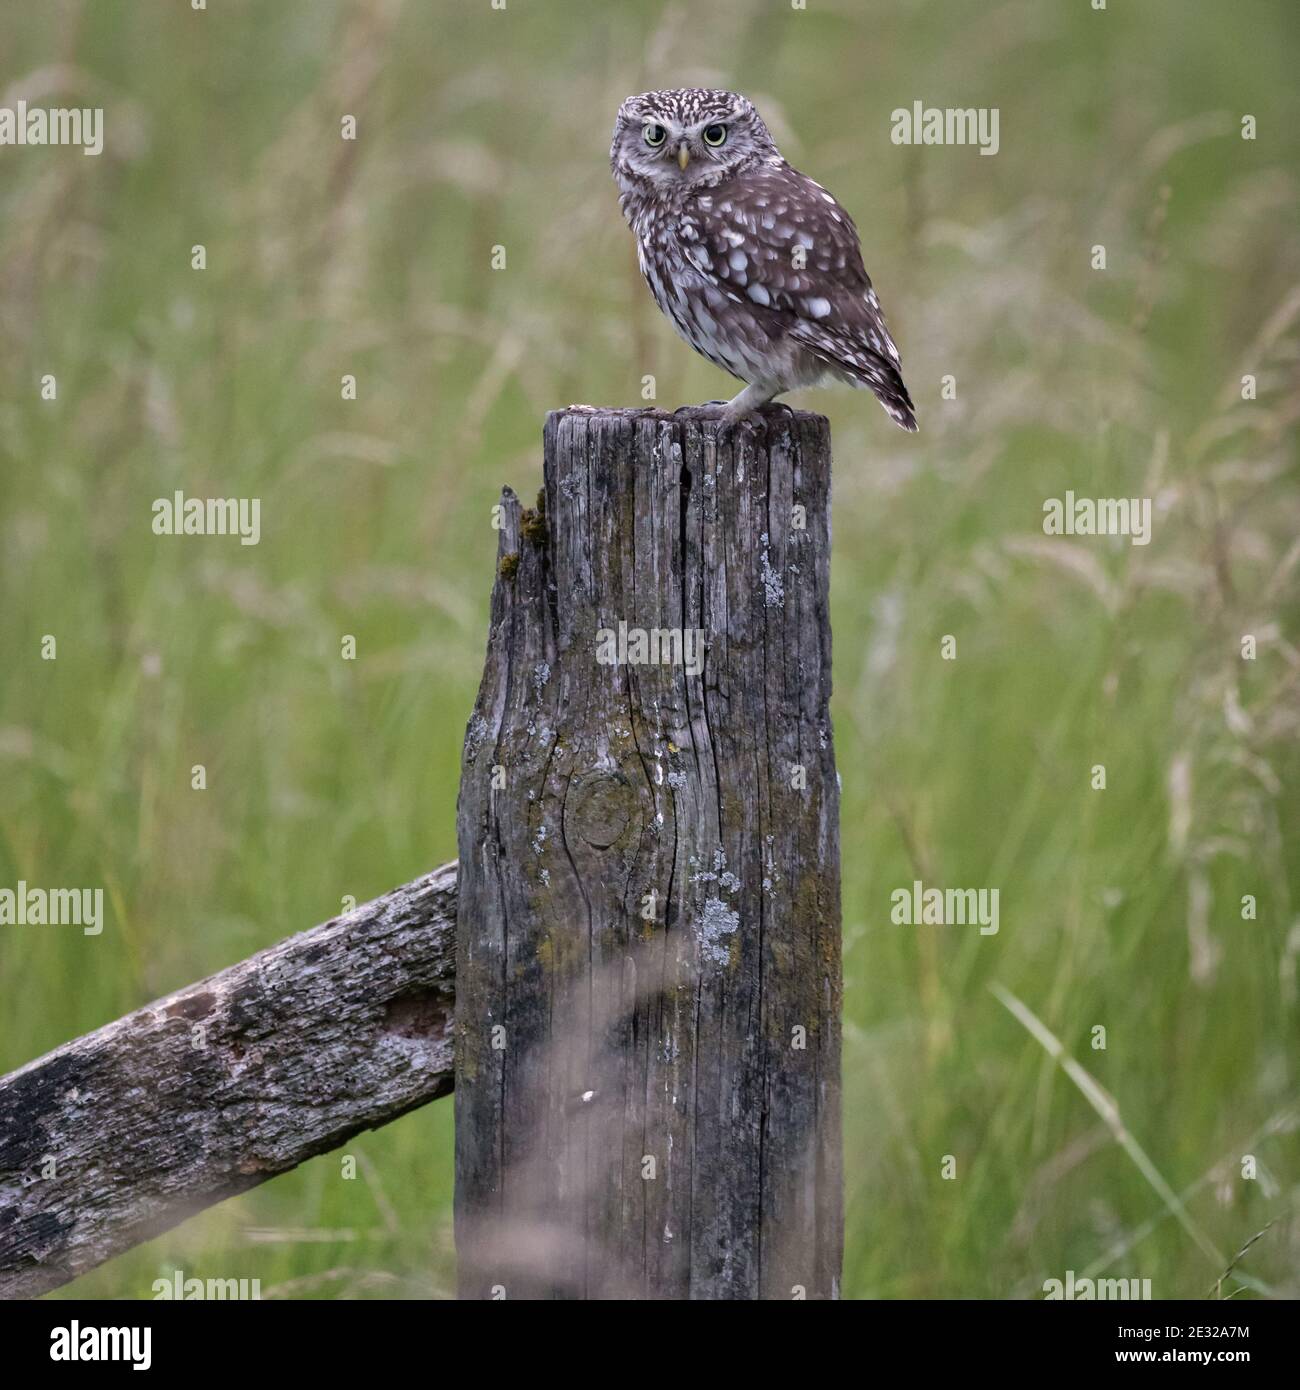 Little Owl, resting on an old wooden farm post in the British countryside. Stock Photo